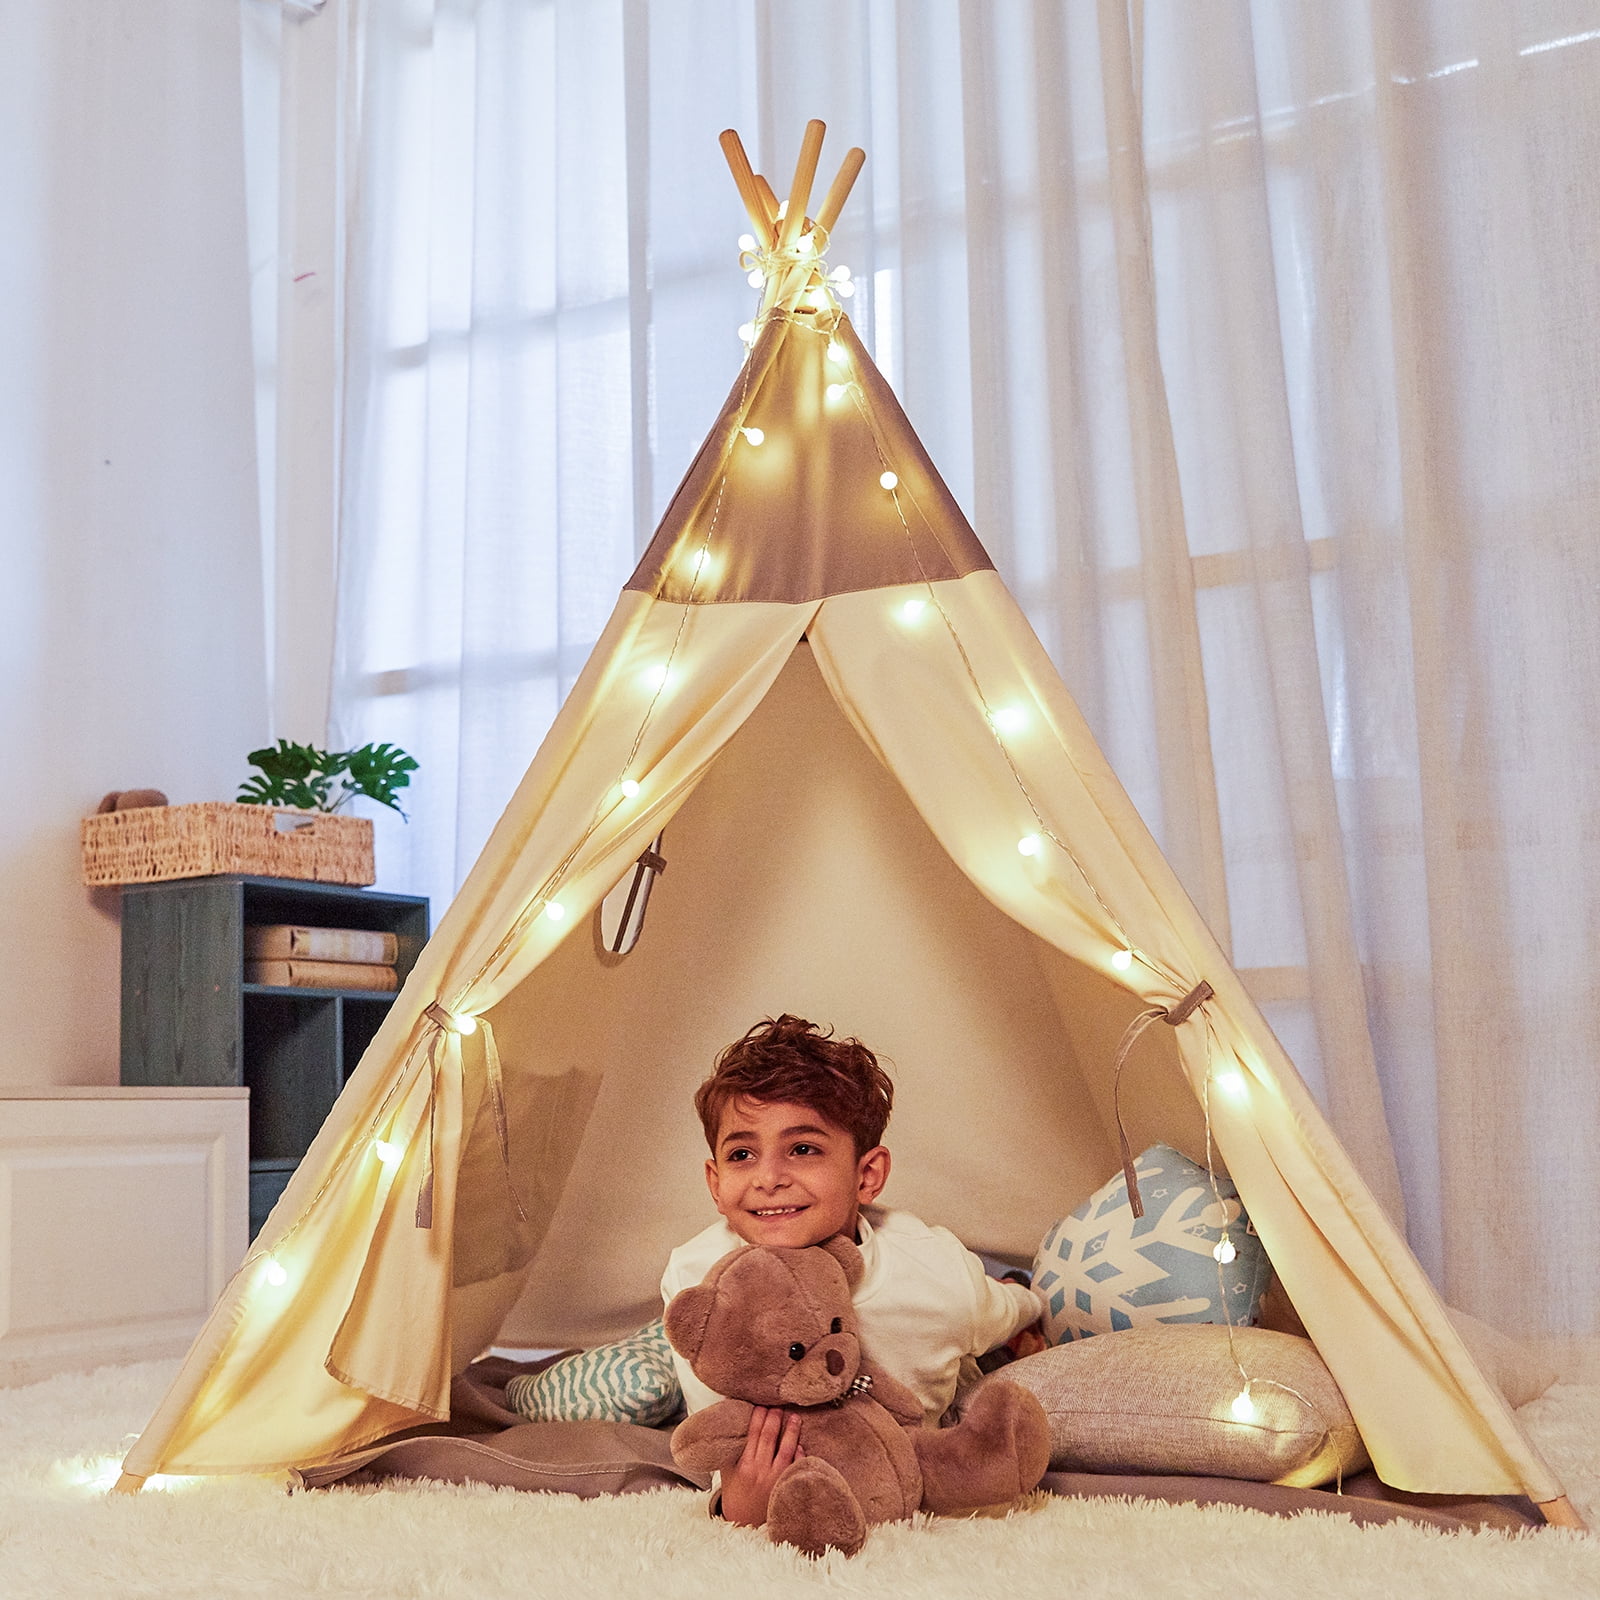 Toddler Teepee Indoor Playhouse for Kids Foldable Kids Reading Nook for Boys & Girls Great for Outdoor Play Tee Pee for Children White Canvas Teepee Play Tent with Carry Case 